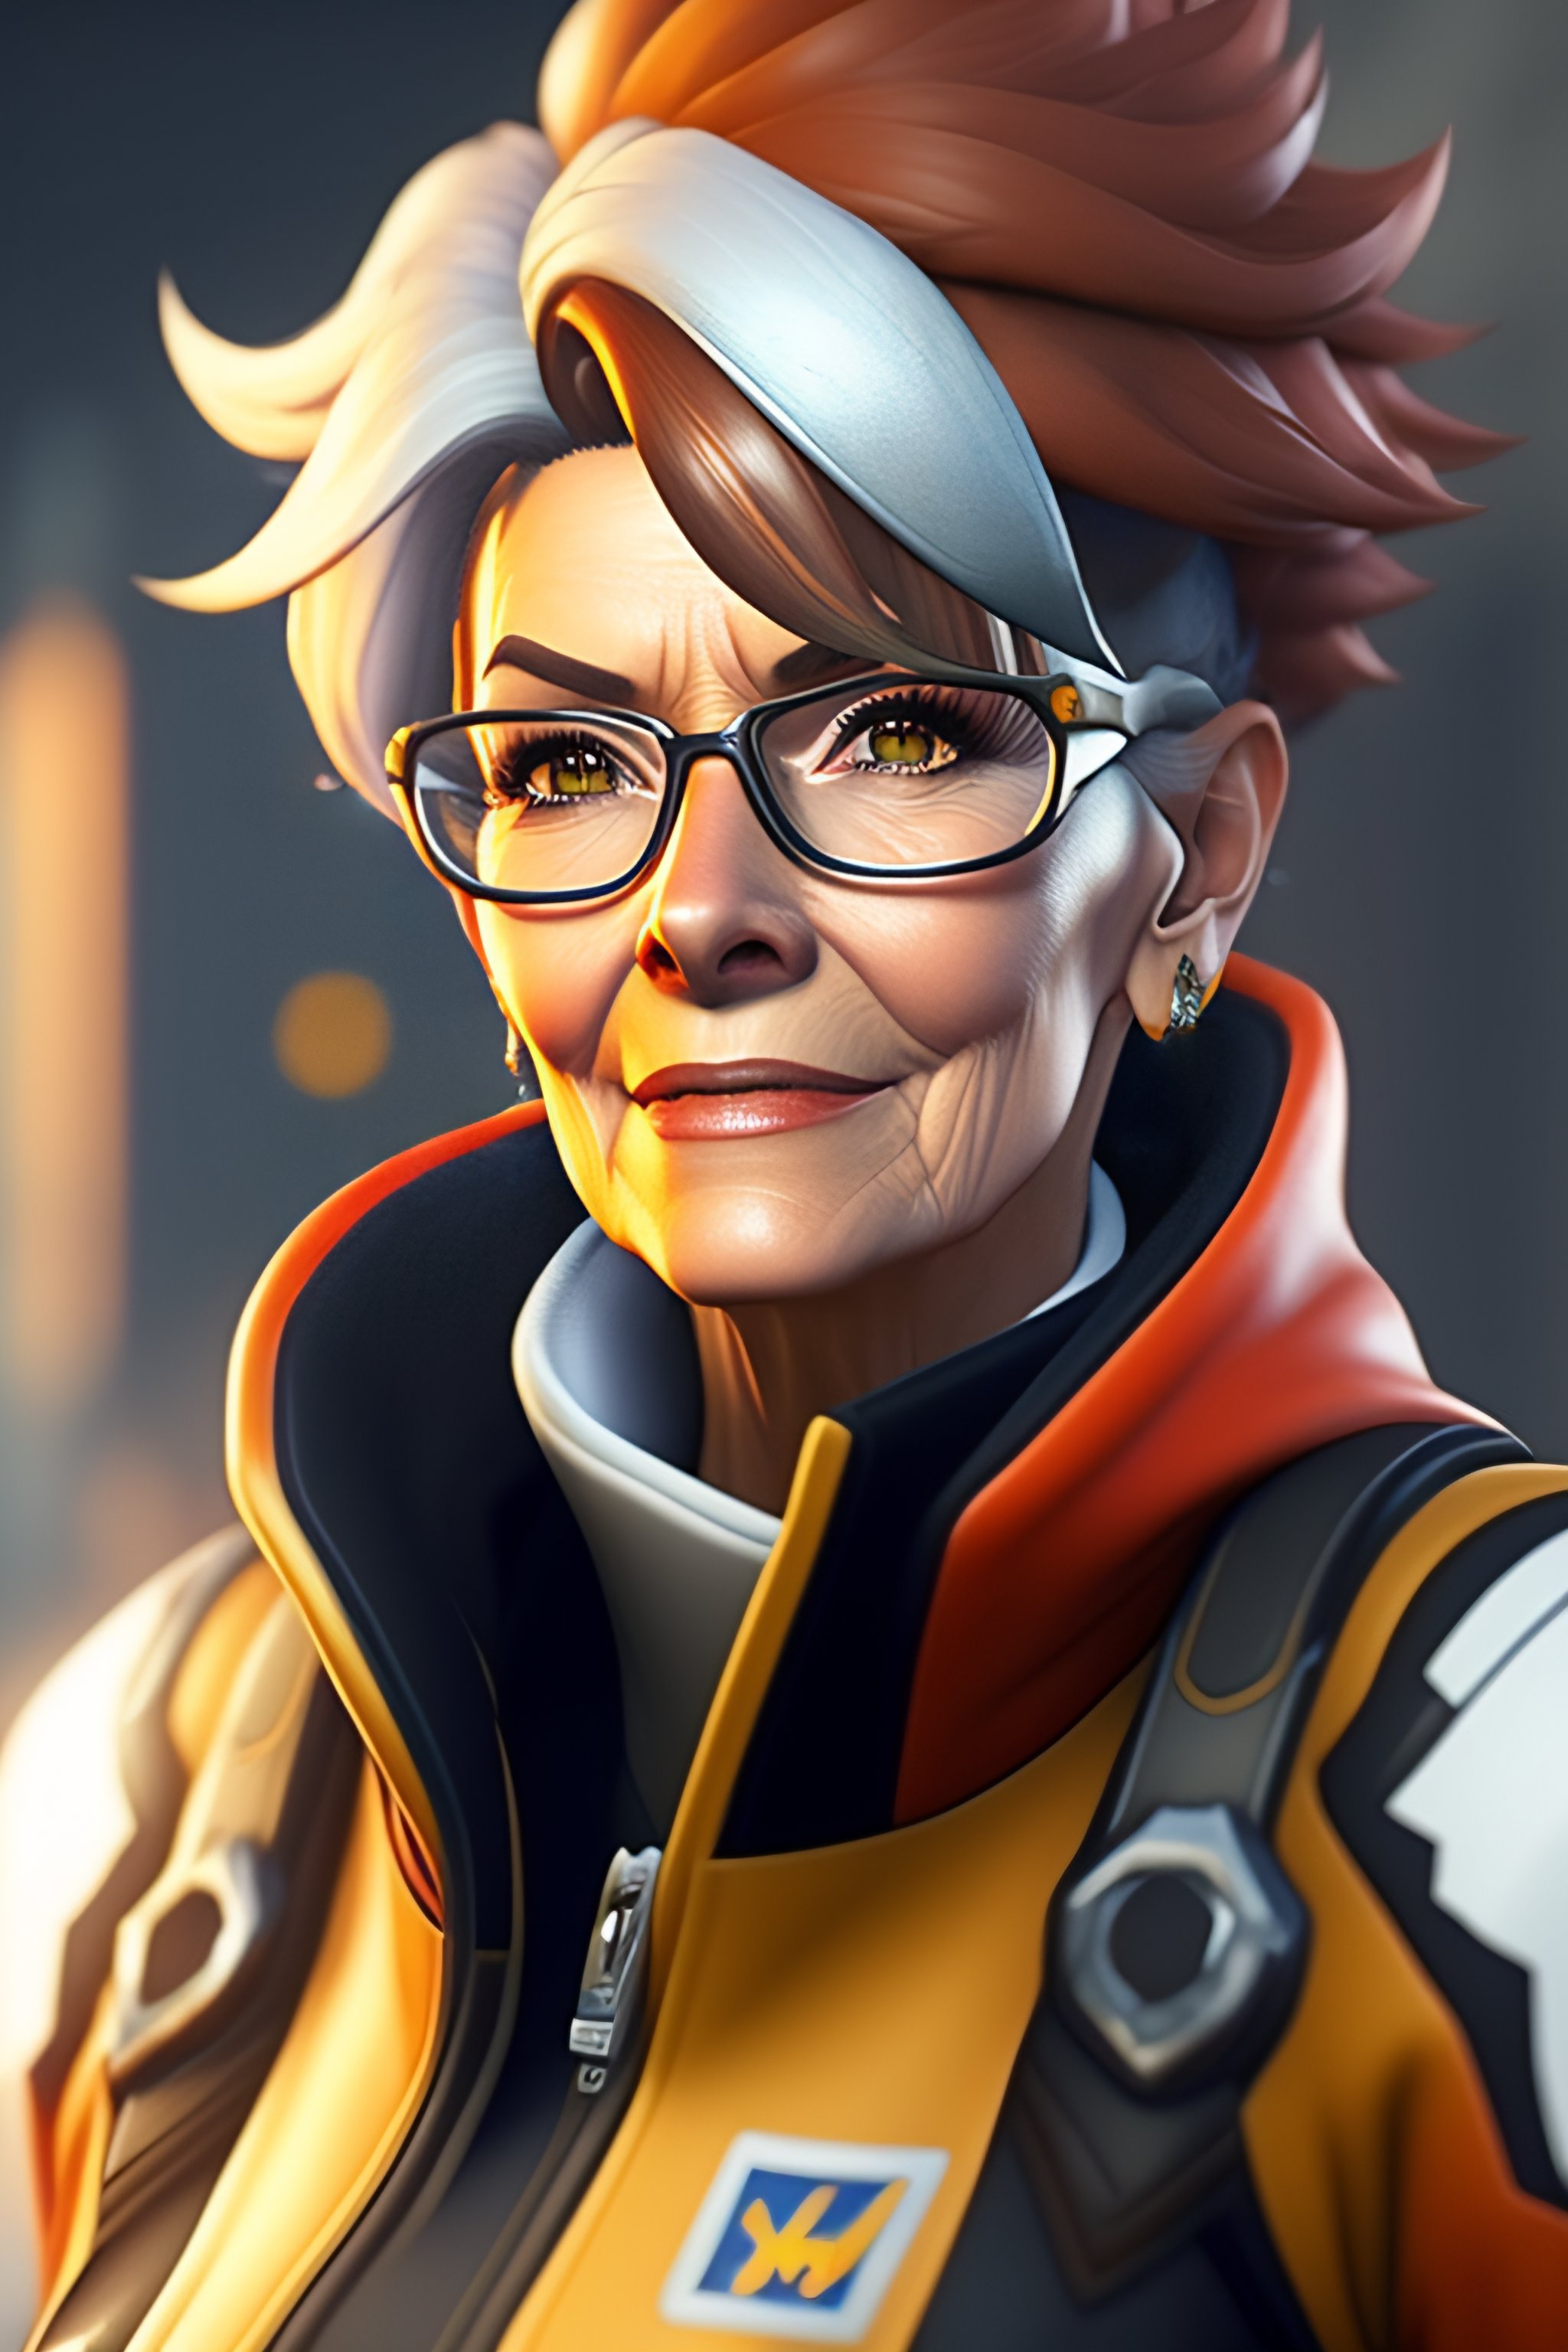 Lexica - Tracer from Overwatch at forty years of age